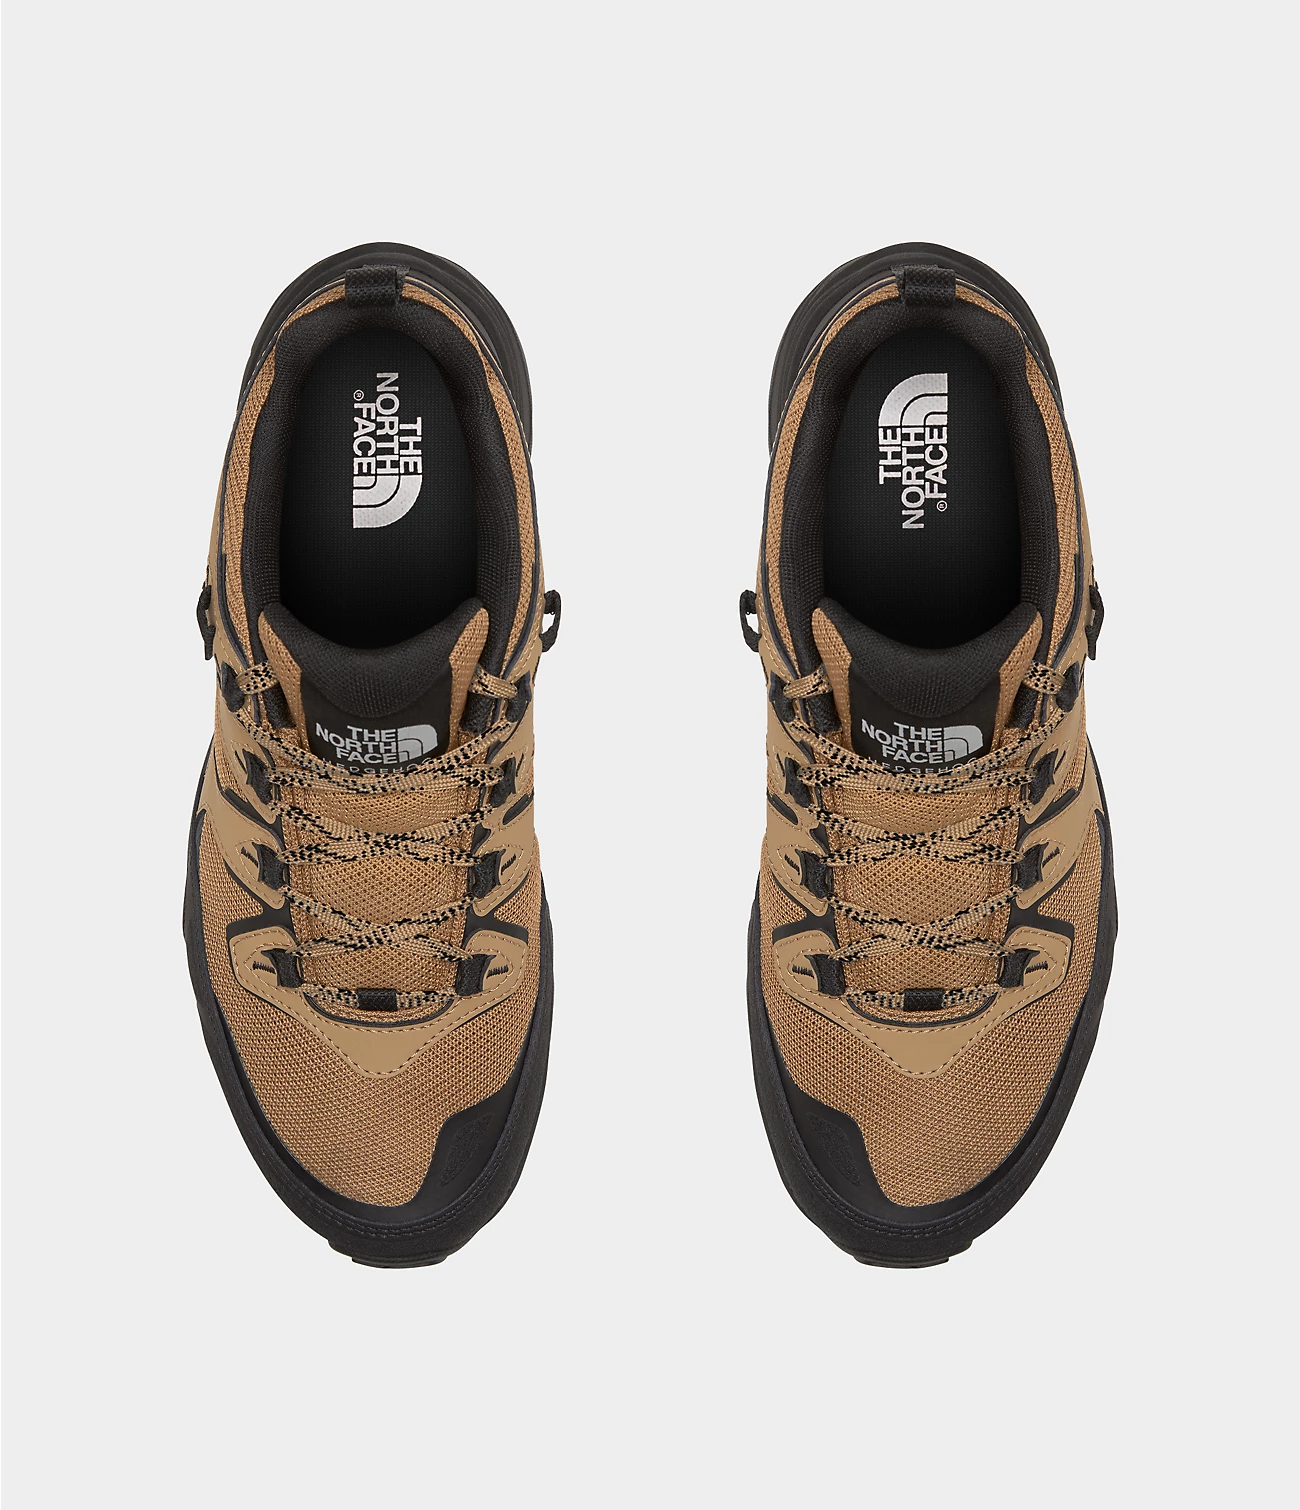 The North Face The North Face Men's Hedgehog 3 Waterproof Shoe